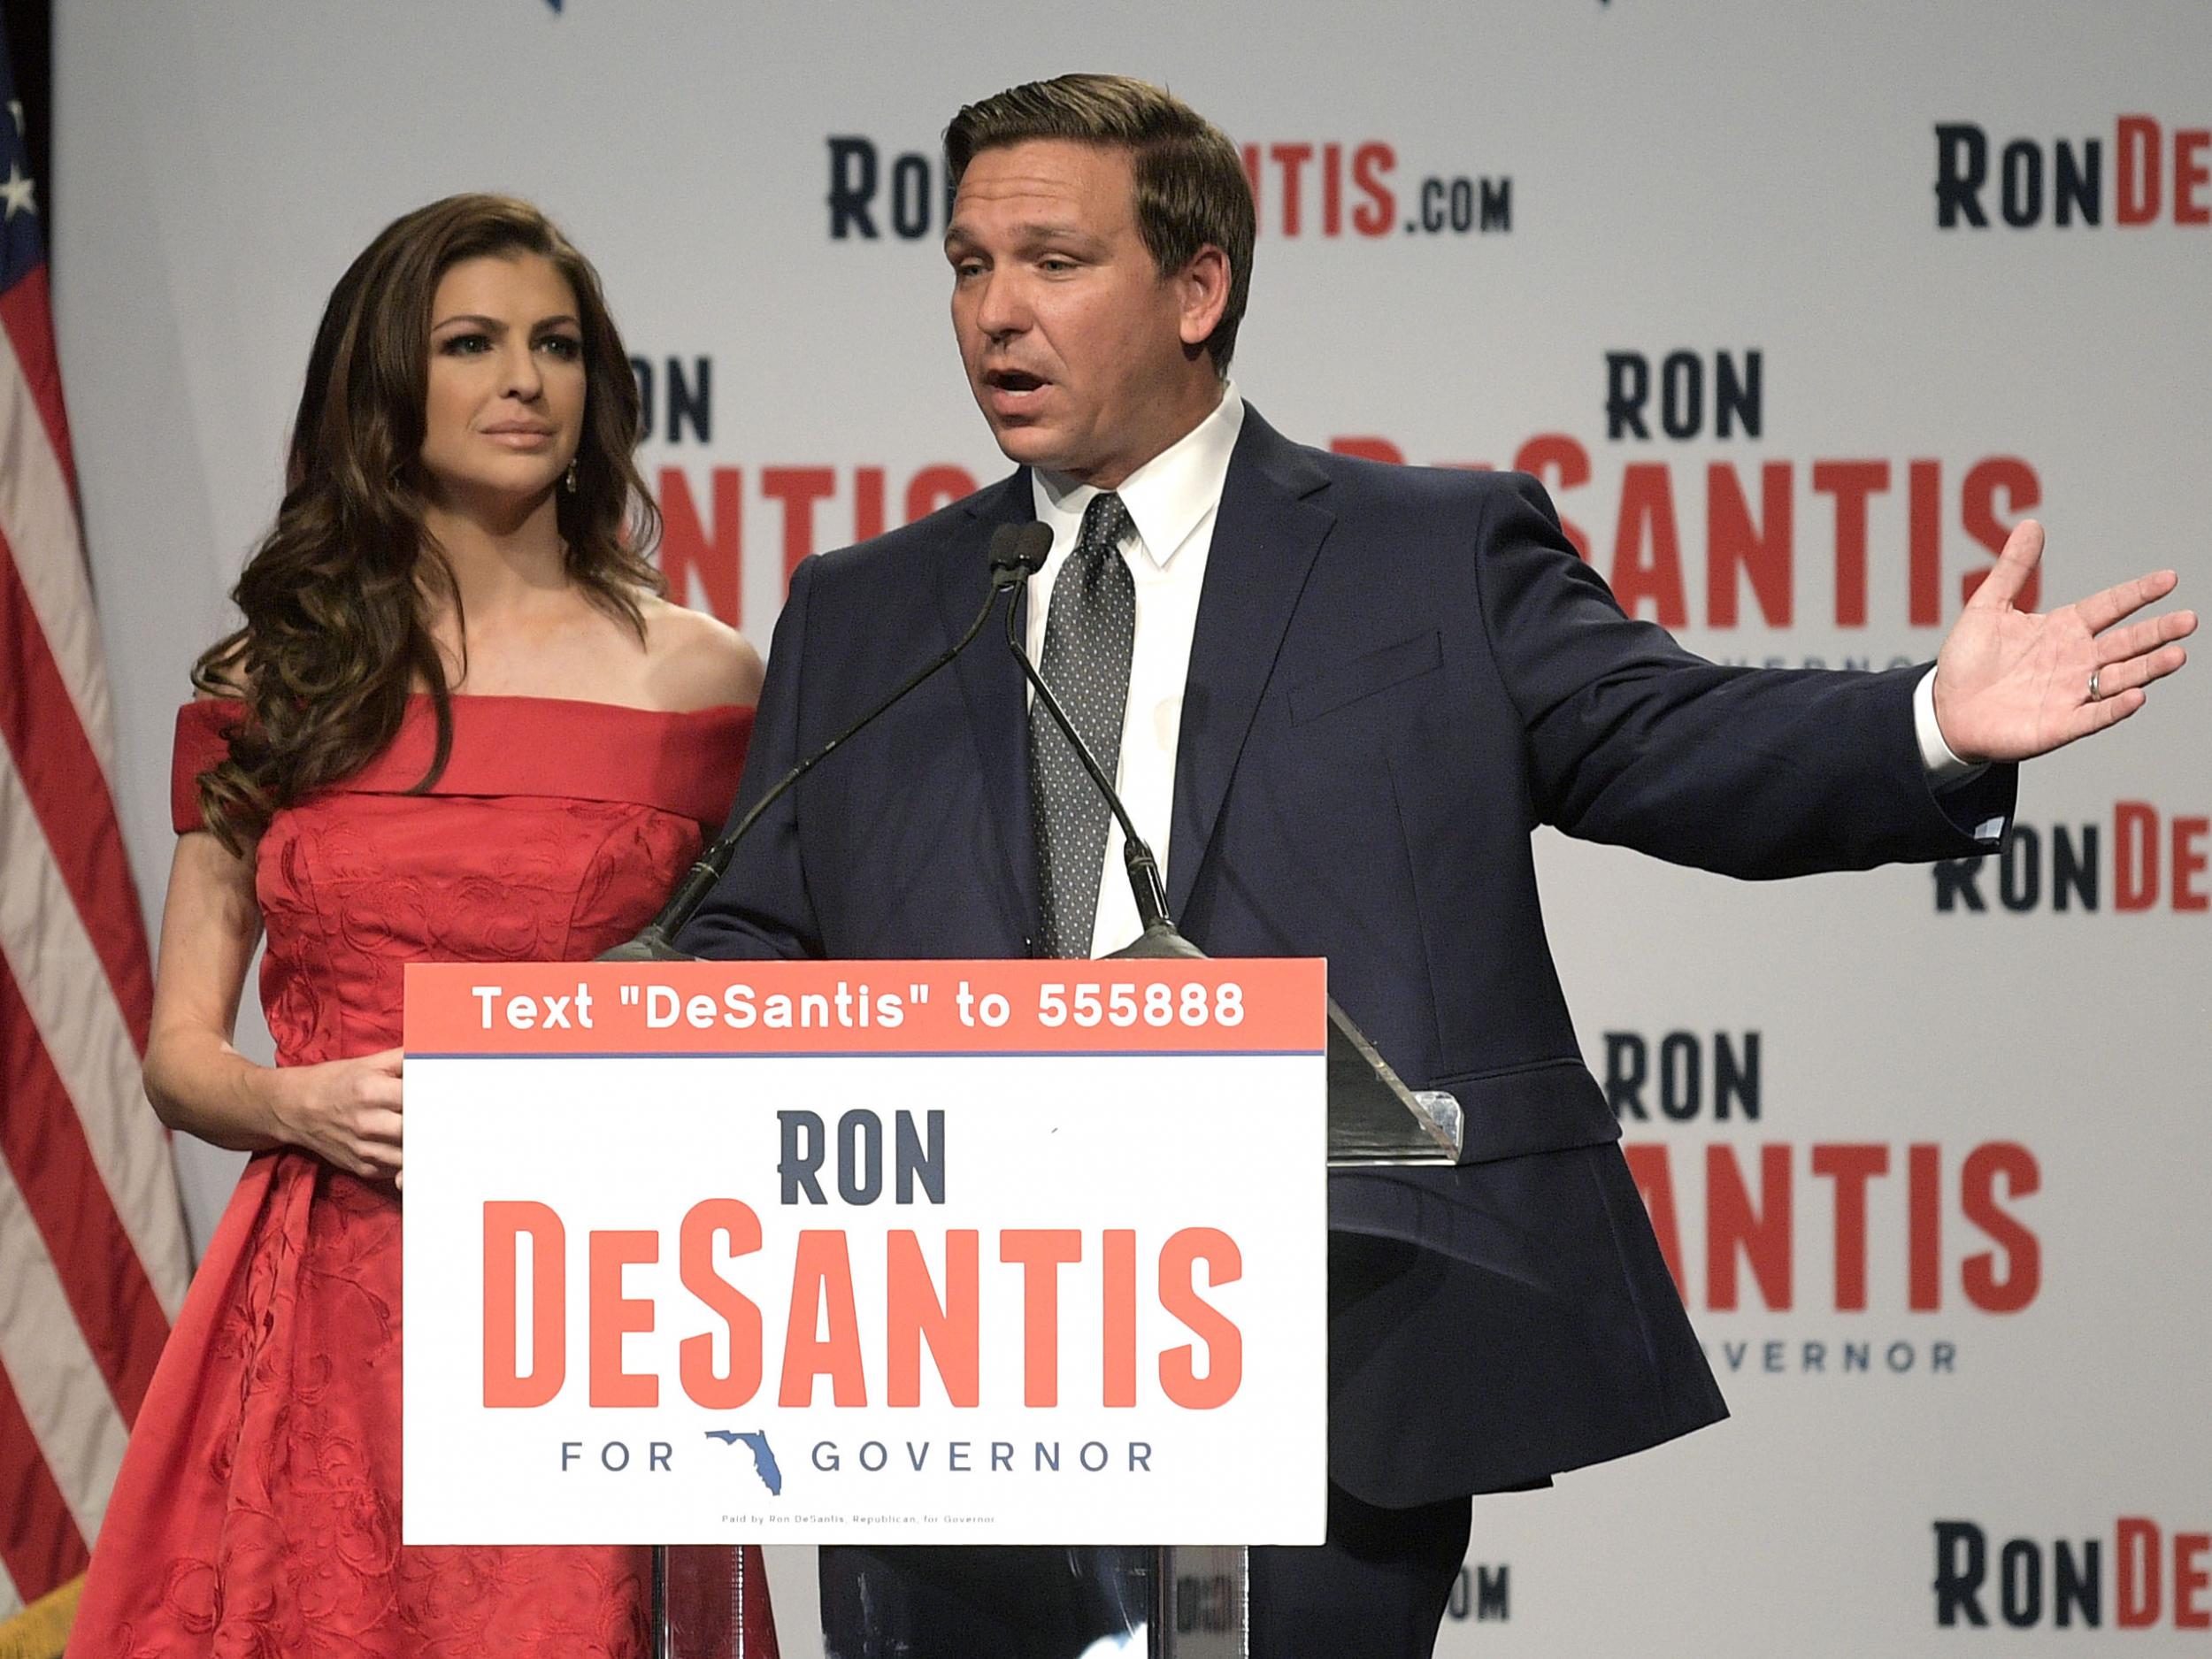 Governor DeSantis has brought in felony charges which effectively criminalize dissent